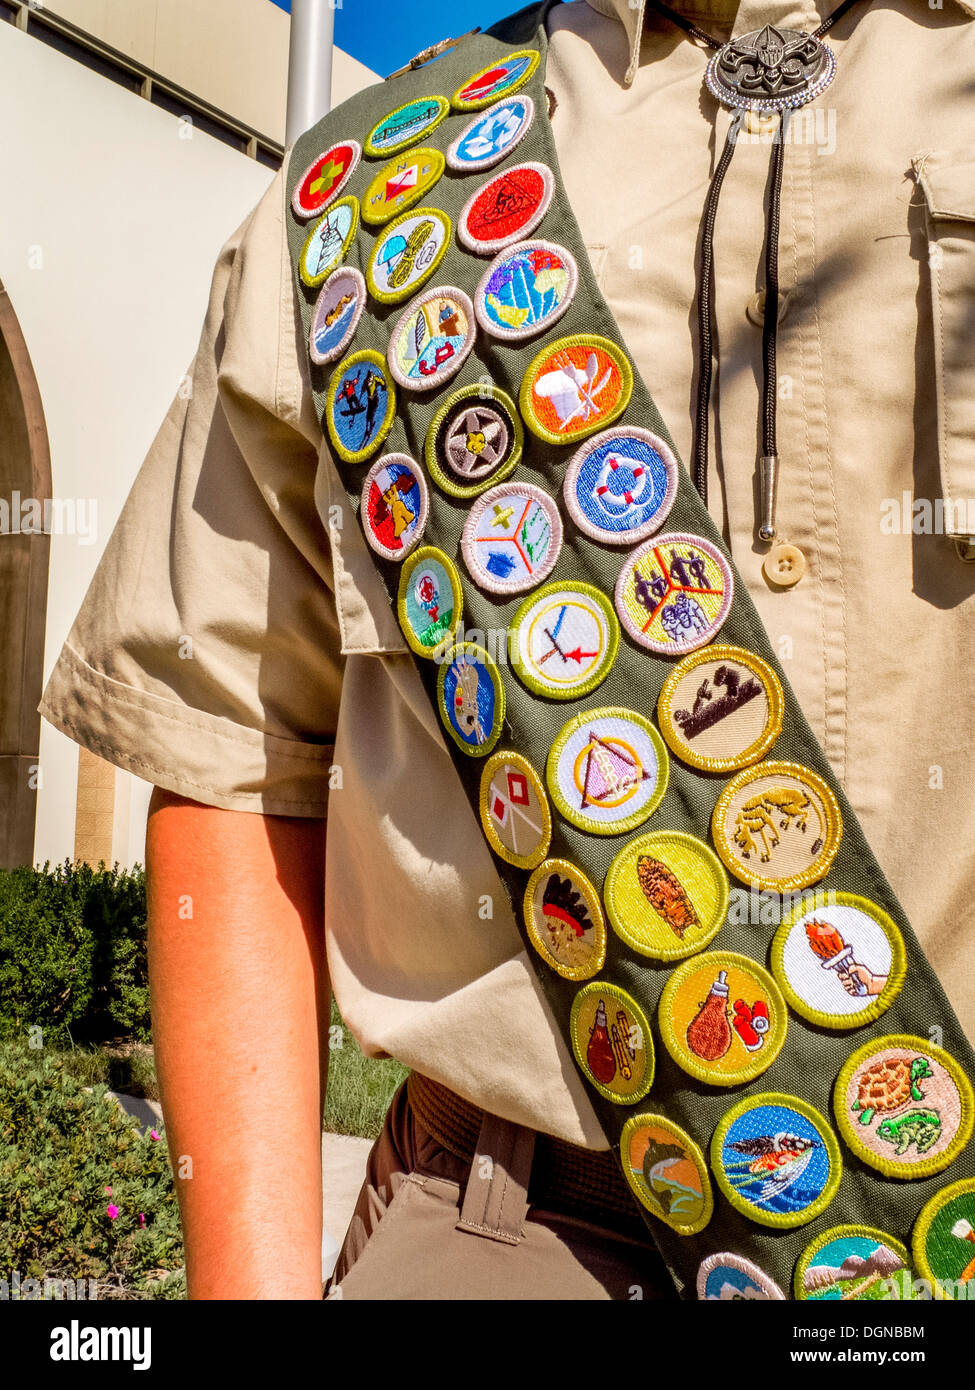 A Boy Scout's merit badge sash includes achievement badges for woodworking, naturalism, cooking, Indian lore, and entomology. Stock Photo